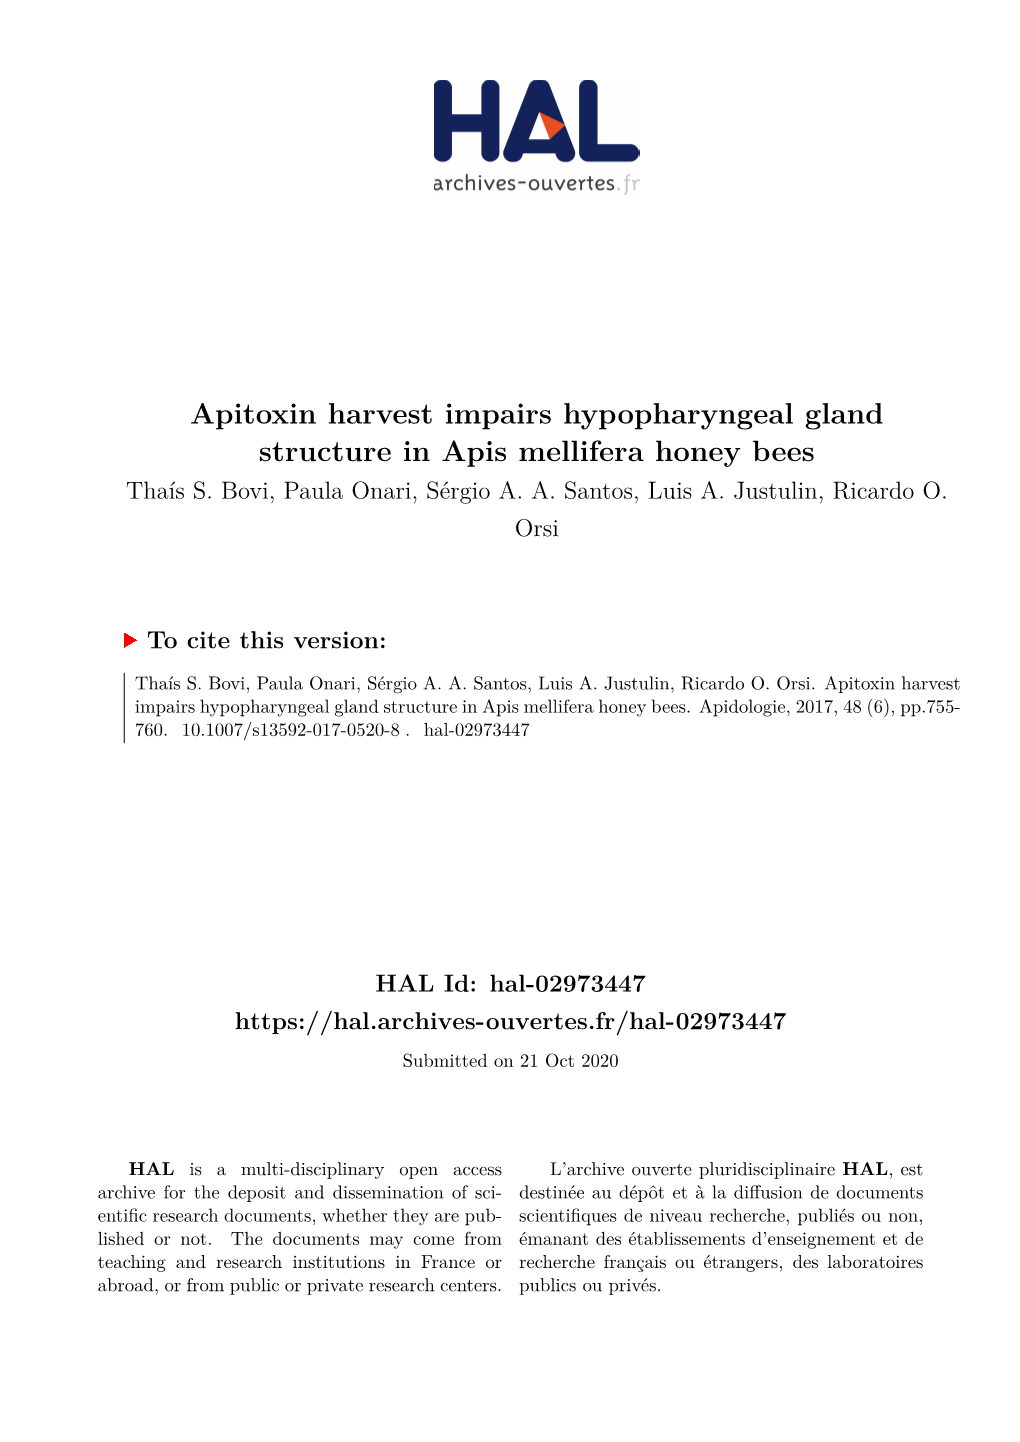 Apitoxin Harvest Impairs Hypopharyngeal Gland Structure in Apis Mellifera Honey Bees Thaís S